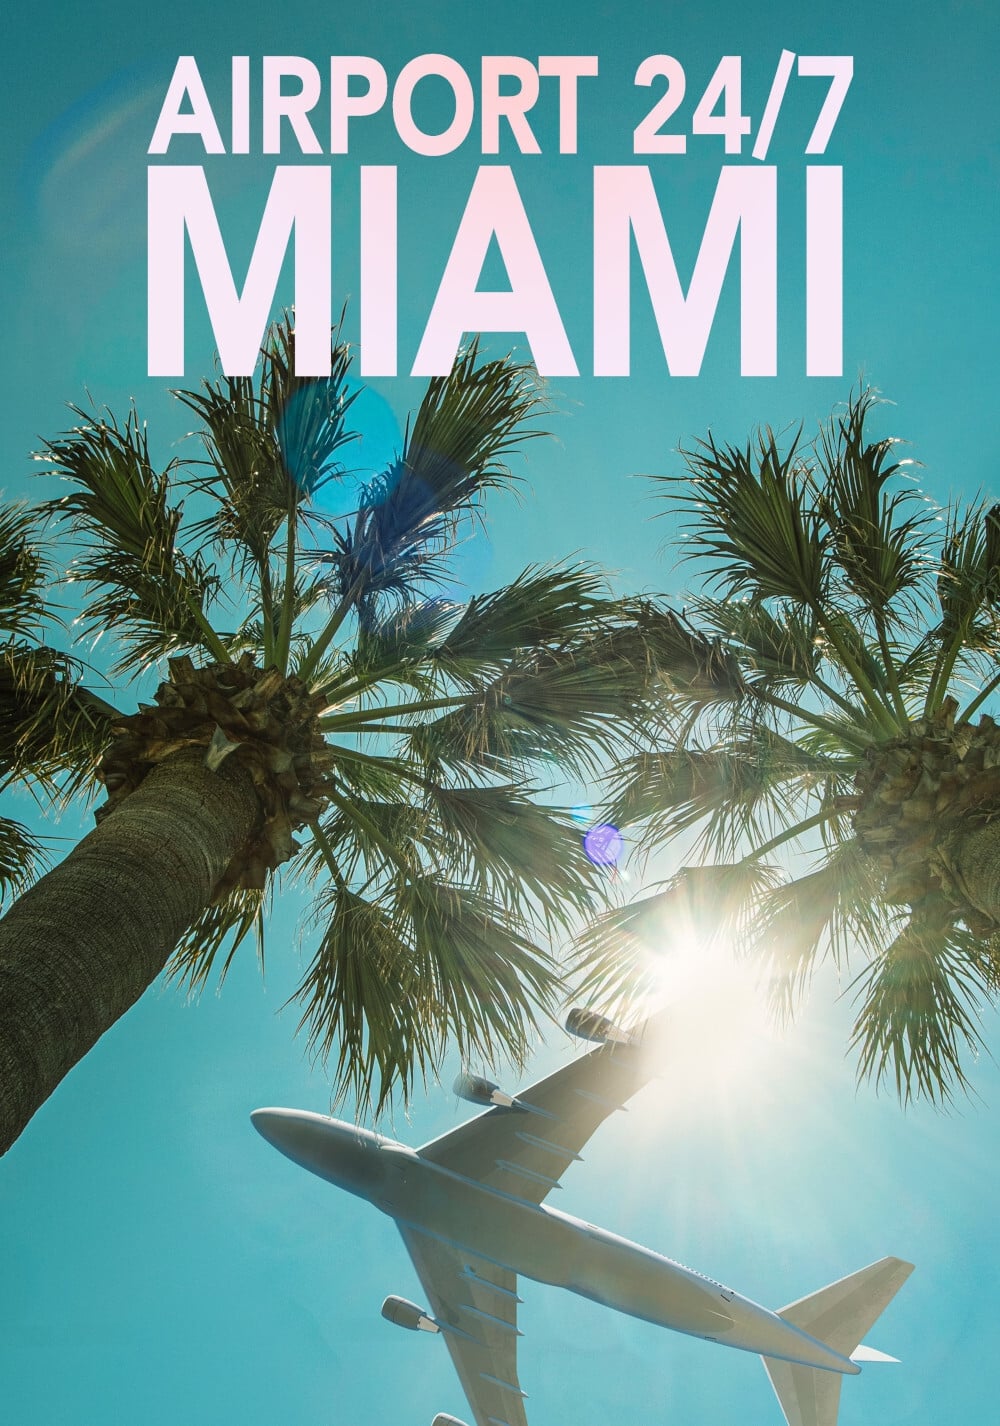 Airport 24/7: Miami TV Shows About Florida